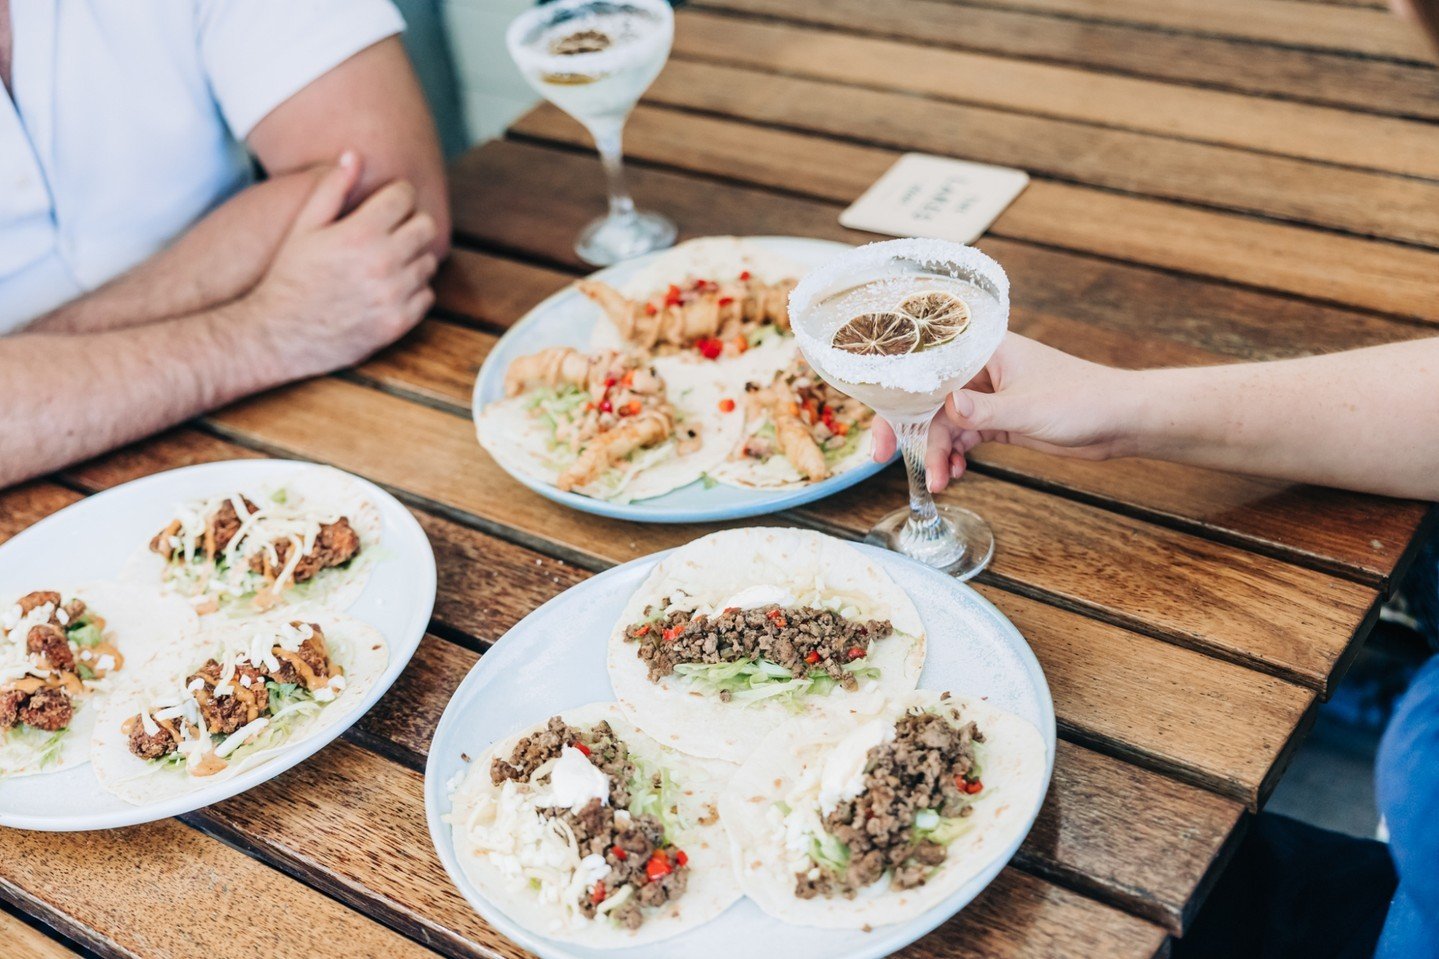 Happy Cinco De Mayo! 🇲🇽

Taste the flavours of Mexico with our $5 Taco specials and Lakes Margy's from 11:30am 🌮

Stick around for live tunes from Matt Ross and The Mavericks to end your Sunday the right way!